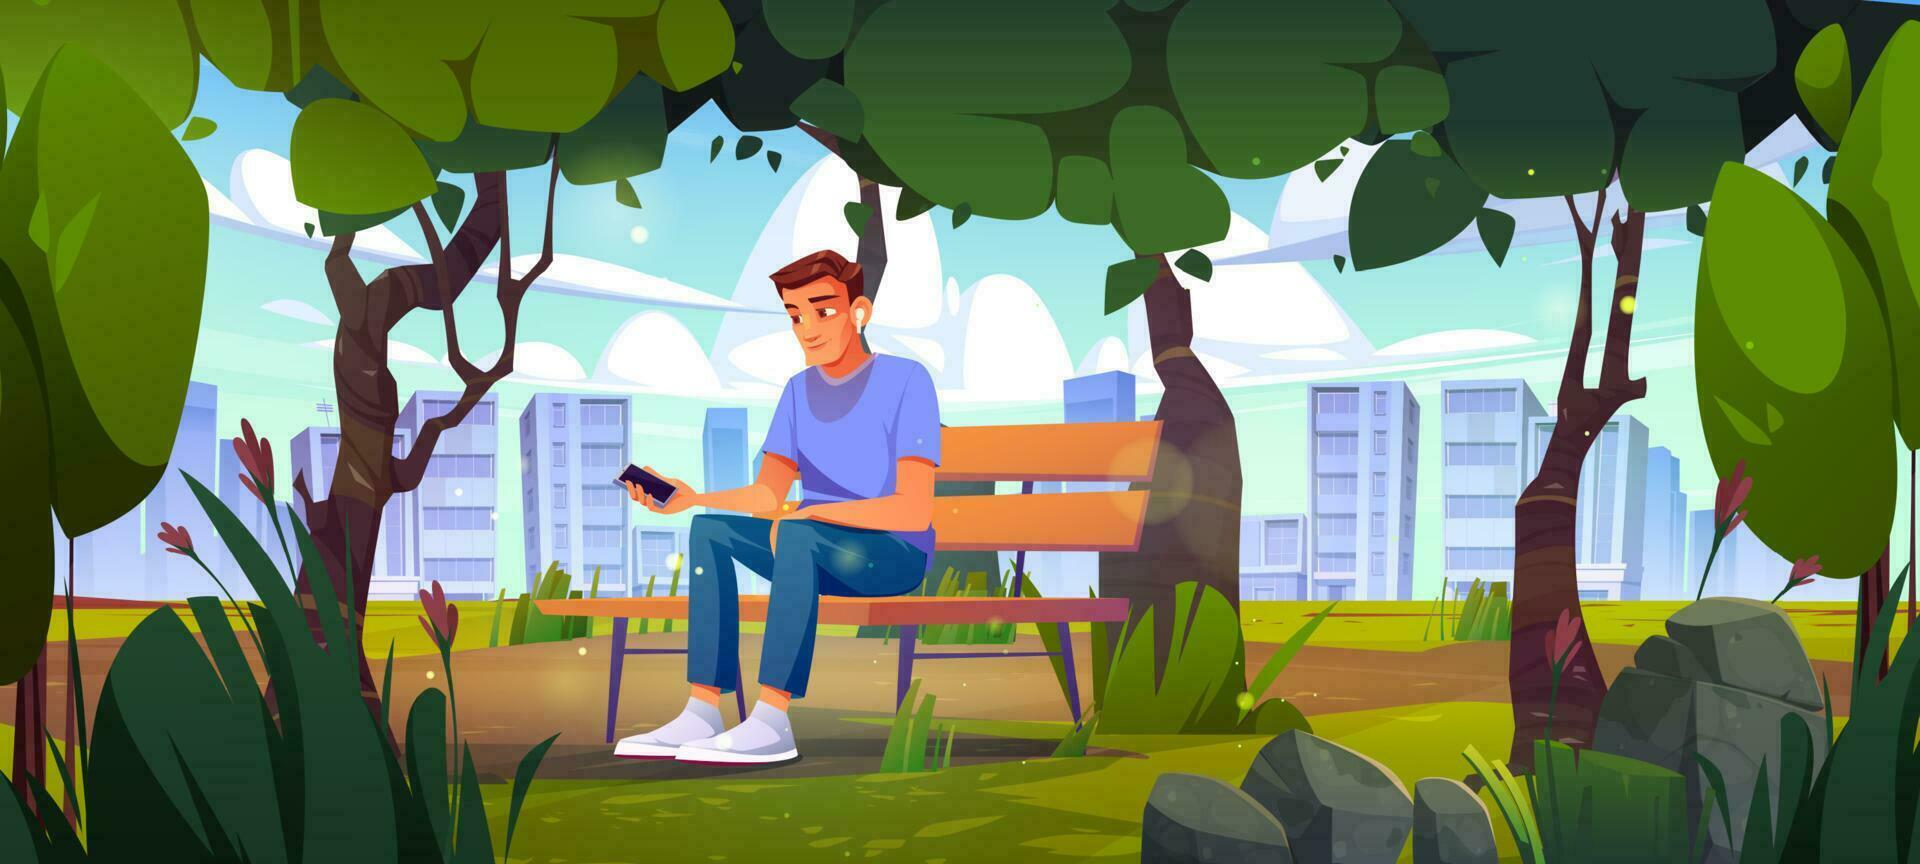 Man use mobile phone sitting on bench in city park vector